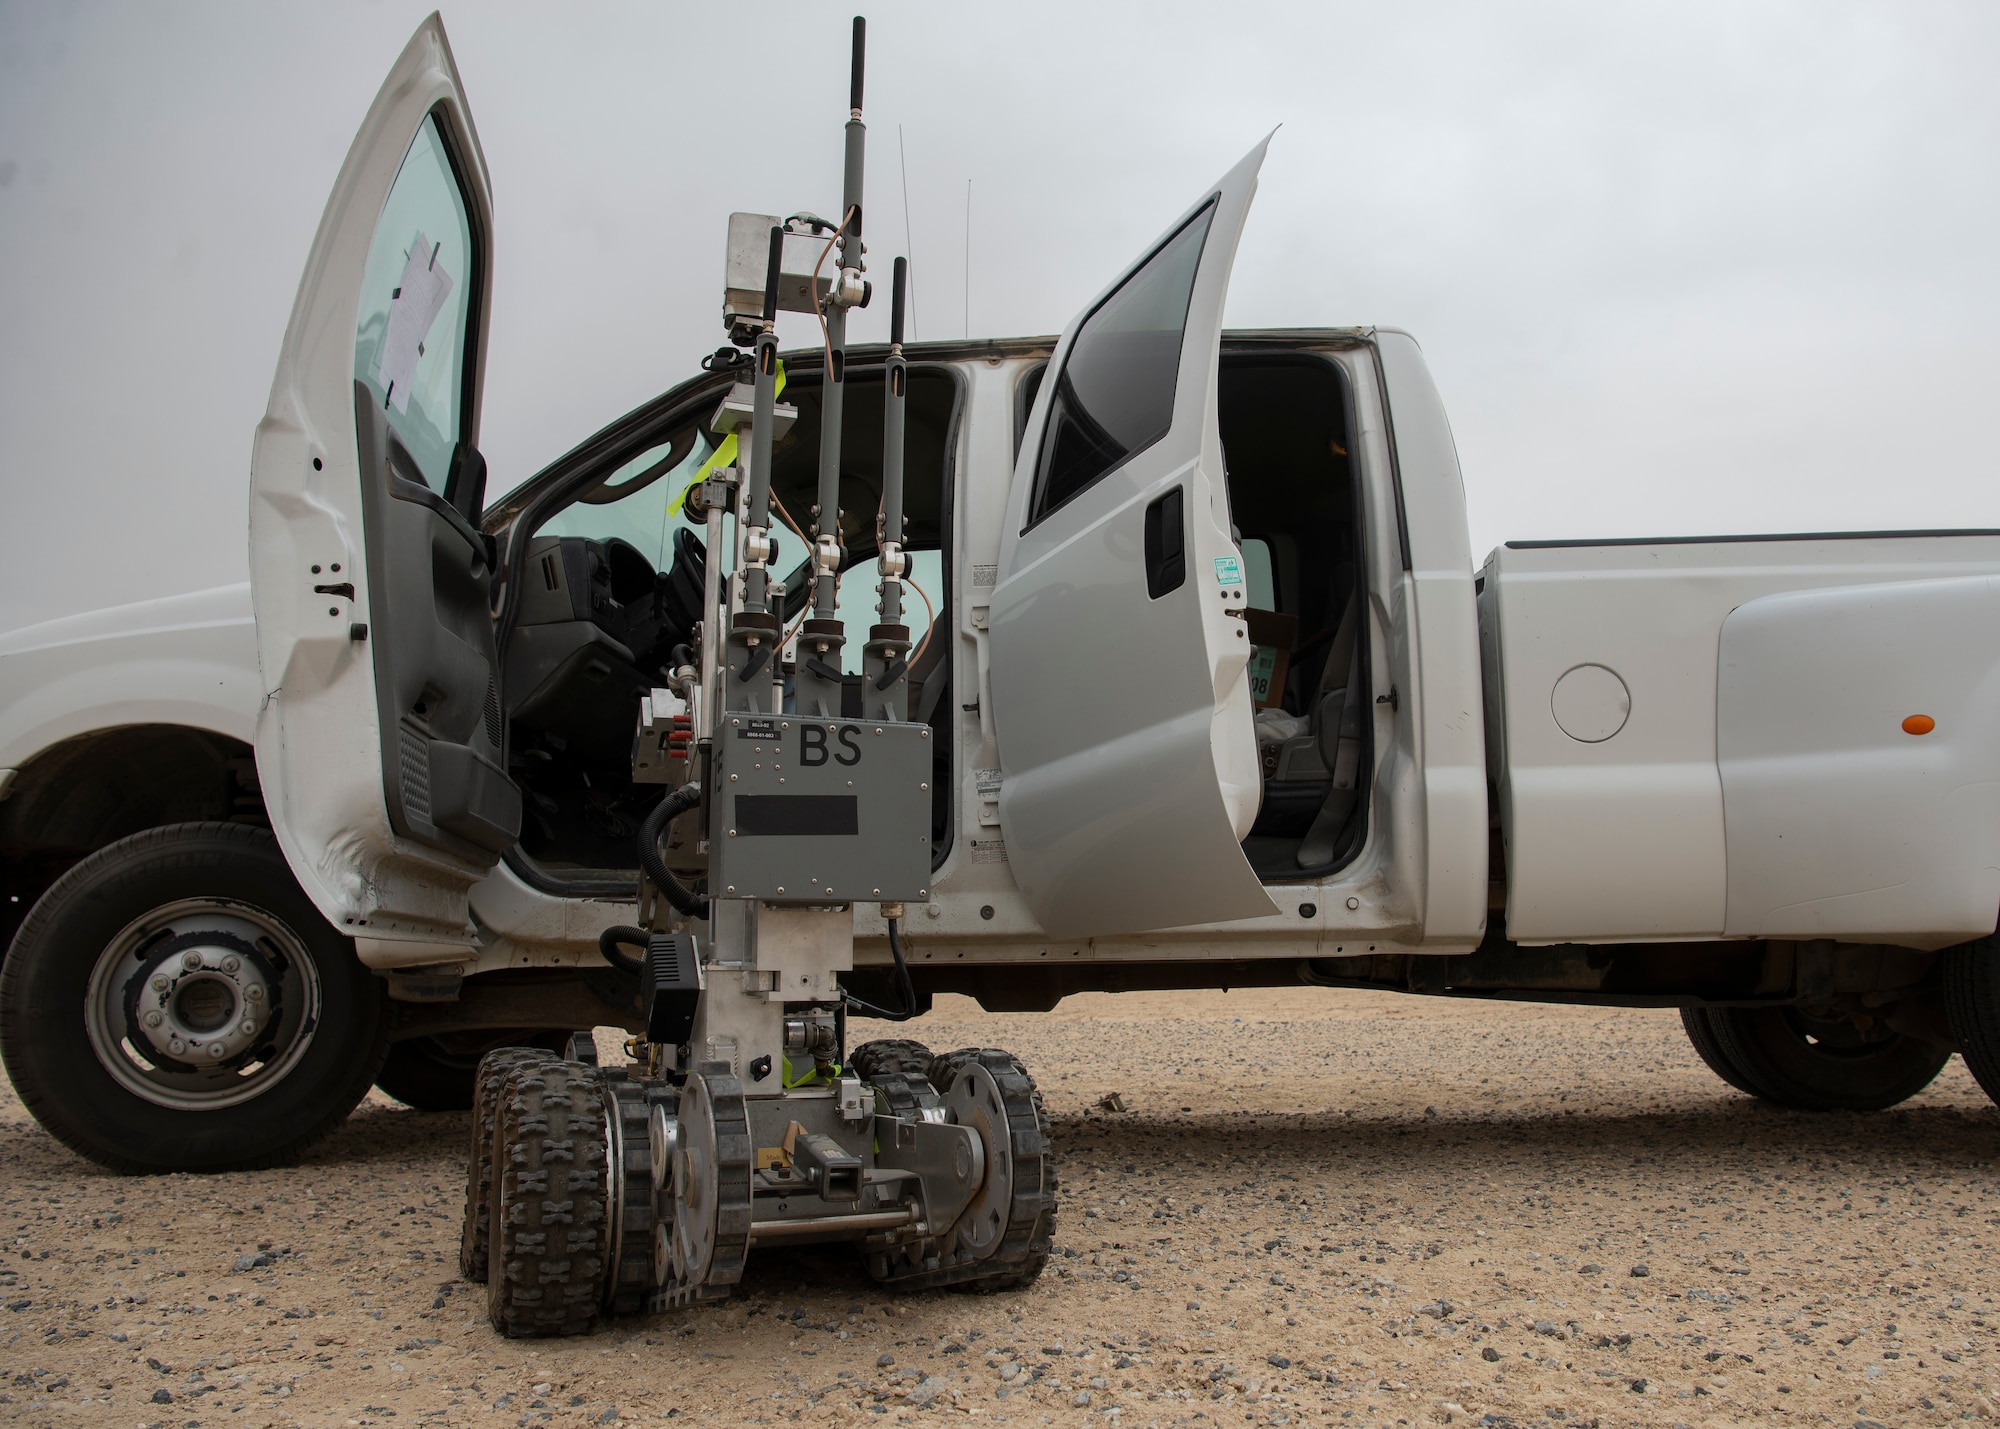 An explosive ordnance disposal robot, piloted by a 386th Expeditionary Civil Engineer Squadron EOD technician, assesses a vehicle during a an all-hazard training exercise at Ali Al Salem Air Base, Kuwait, May 5, 2020. The exercise was designed to enhance interoperability between multiple first responder teams with the goal of responding, identifying and controlling potential real-world scenarios. (U.S. Air Force photo by Senior Airman Isaiah J. Soliz)